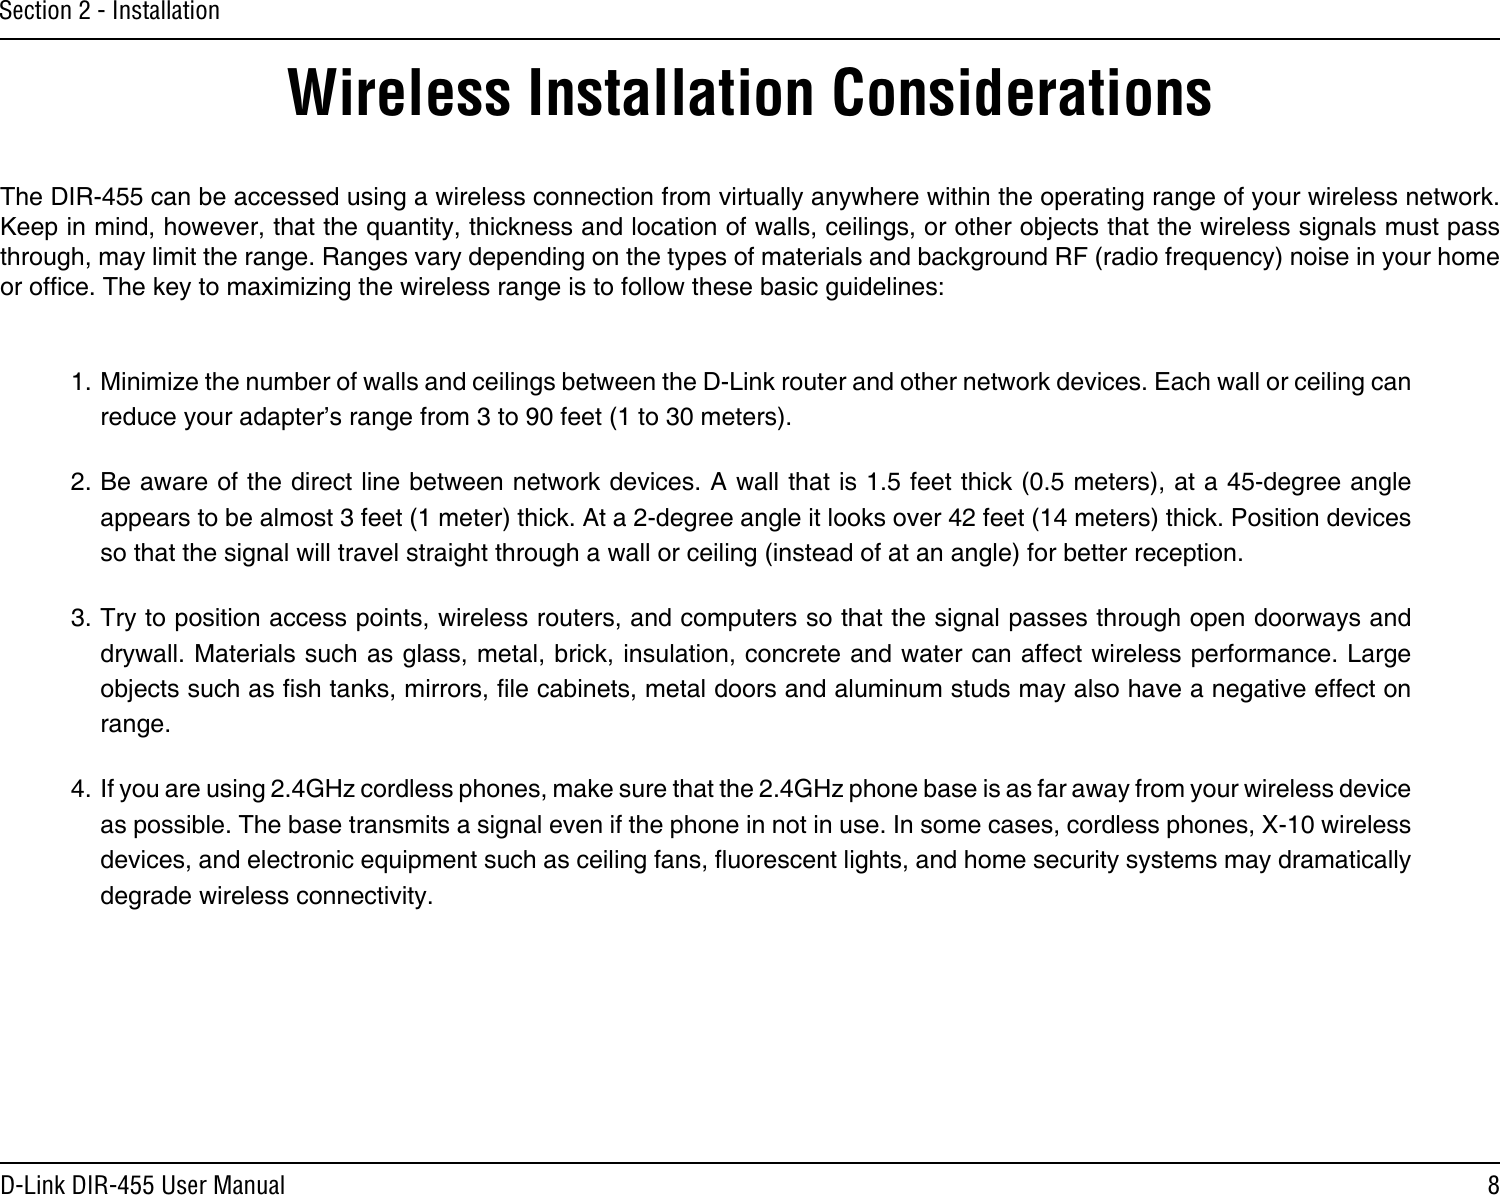 8D-Link DIR-455 User ManualSection 2 - InstallationWireless Installation ConsiderationsThe DIR-455 can be accessed using a wireless connection from virtually anywhere within the operating range of your wireless network. Keep in mind, however, that the quantity, thickness and location of walls, ceilings, or other objects that the wireless signals must pass through, may limit the range. Ranges vary depending on the types of materials and background RF (radio frequency) noise in your home or ofce. The key to maximizing the wireless range is to follow these basic guidelines:1. Minimize the number of walls and ceilings between the D-Link router and other network devices. Each wall or ceiling can reduce your adapter’s range from 3 to 90 feet (1 to 30 meters).2. Be aware of the direct line between network devices. A wall that is 1.5 feet thick (0.5 meters), at a 45-degree angle appears to be almost 3 feet (1 meter) thick. At a 2-degree angle it looks over 42 feet (14 meters) thick. Position devices so that the signal will travel straight through a wall or ceiling (instead of at an angle) for better reception.3. Try to position access points, wireless routers, and computers so that the signal passes through open doorways and drywall. Materials such as glass, metal, brick, insulation, concrete and water can affect wireless performance. Large objects such as sh tanks, mirrors, le cabinets, metal doors and aluminum studs may also have a negative effect on range.4. If you are using 2.4GHz cordless phones, make sure that the 2.4GHz phone base is as far away from your wireless device as possible. The base transmits a signal even if the phone in not in use. In some cases, cordless phones, X-10 wireless devices, and electronic equipment such as ceiling fans, uorescent lights, and home security systems may dramatically degrade wireless connectivity.